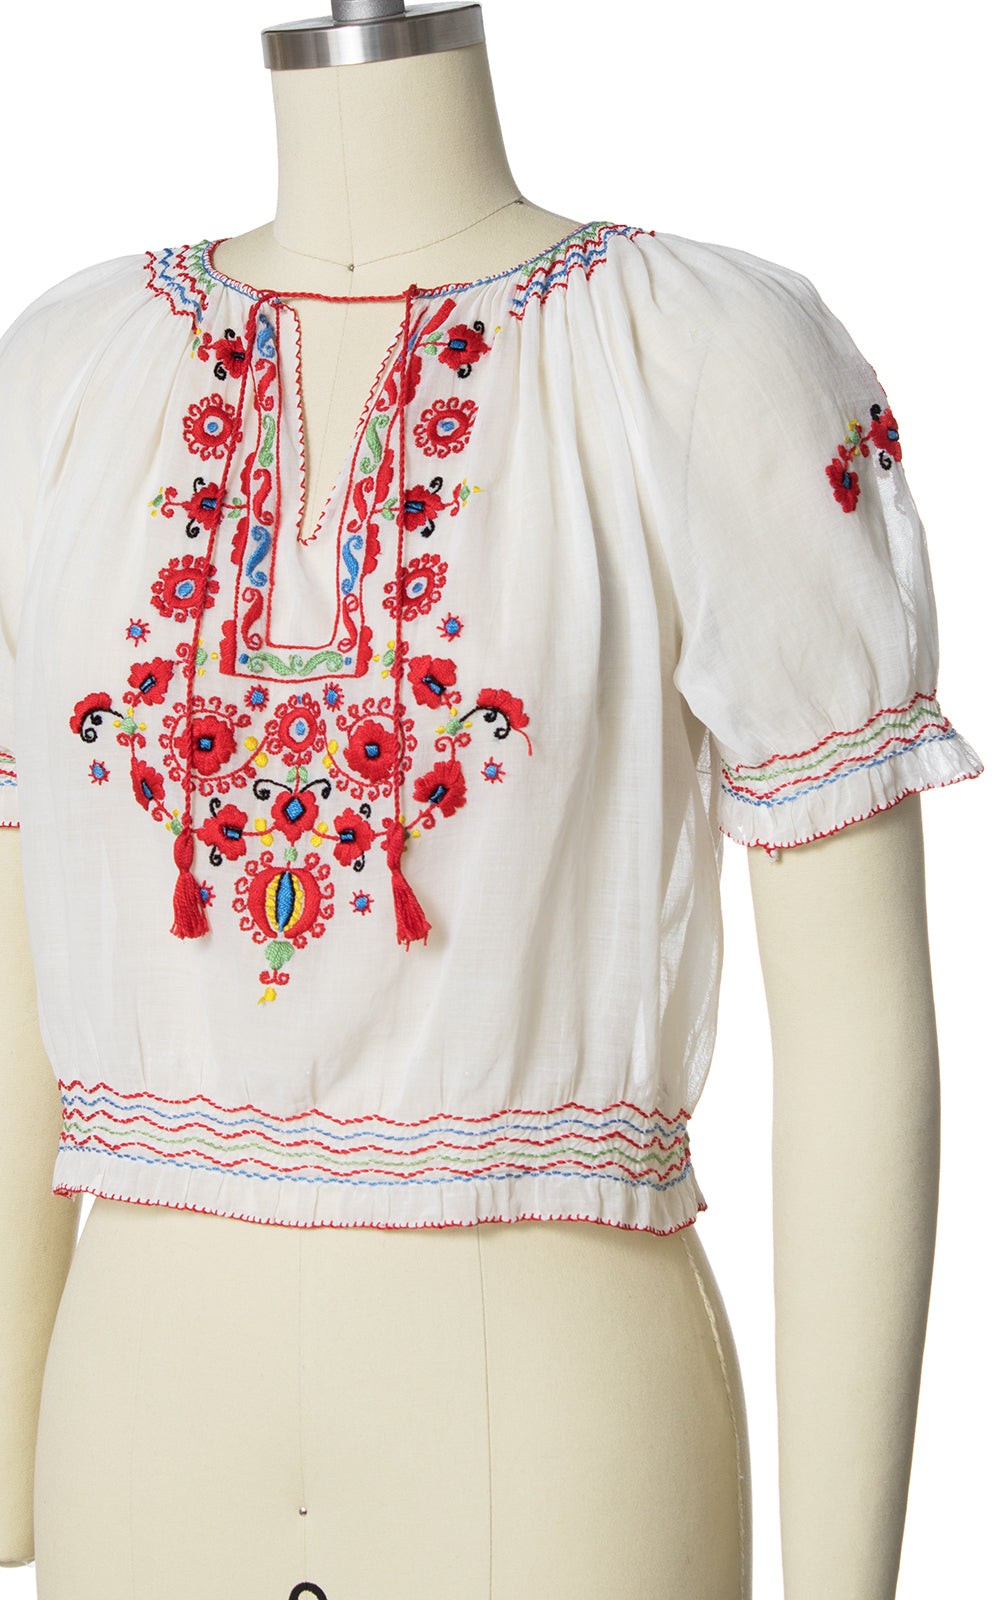 1970s Floral Embroidered Sheer Peasant Top